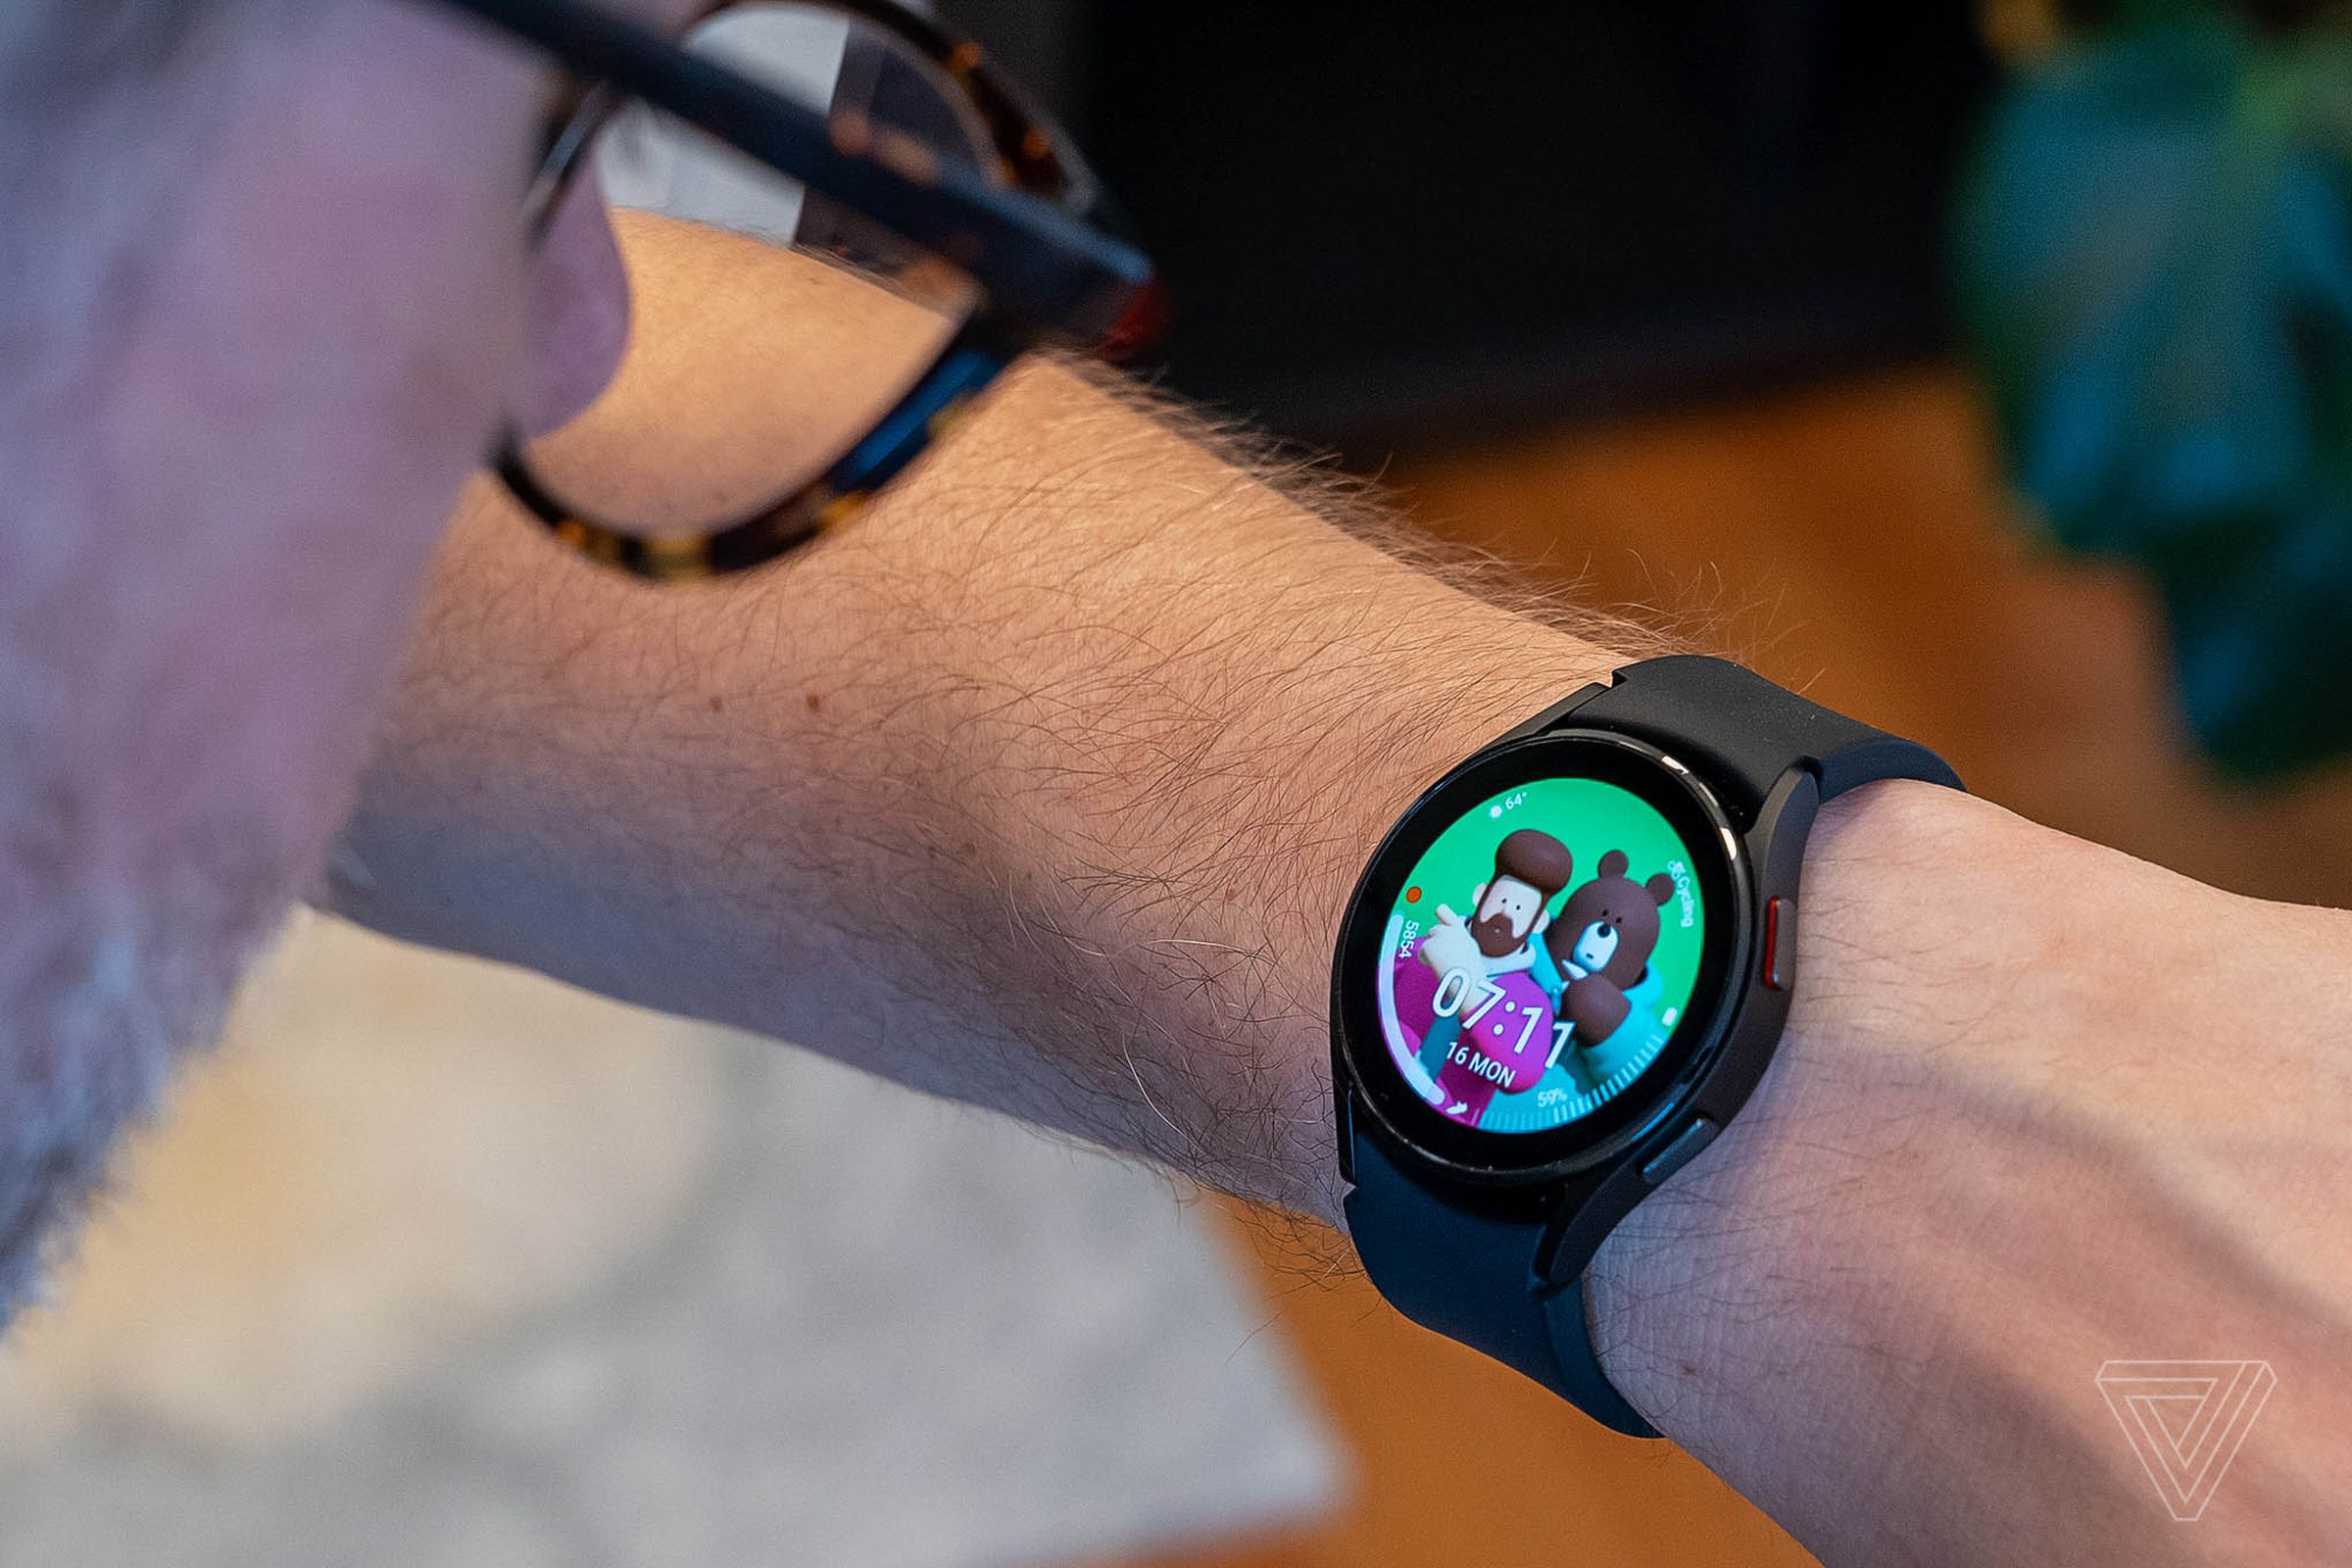 The Galaxy Watch 4 Classic with a fun bear-themed watch face.